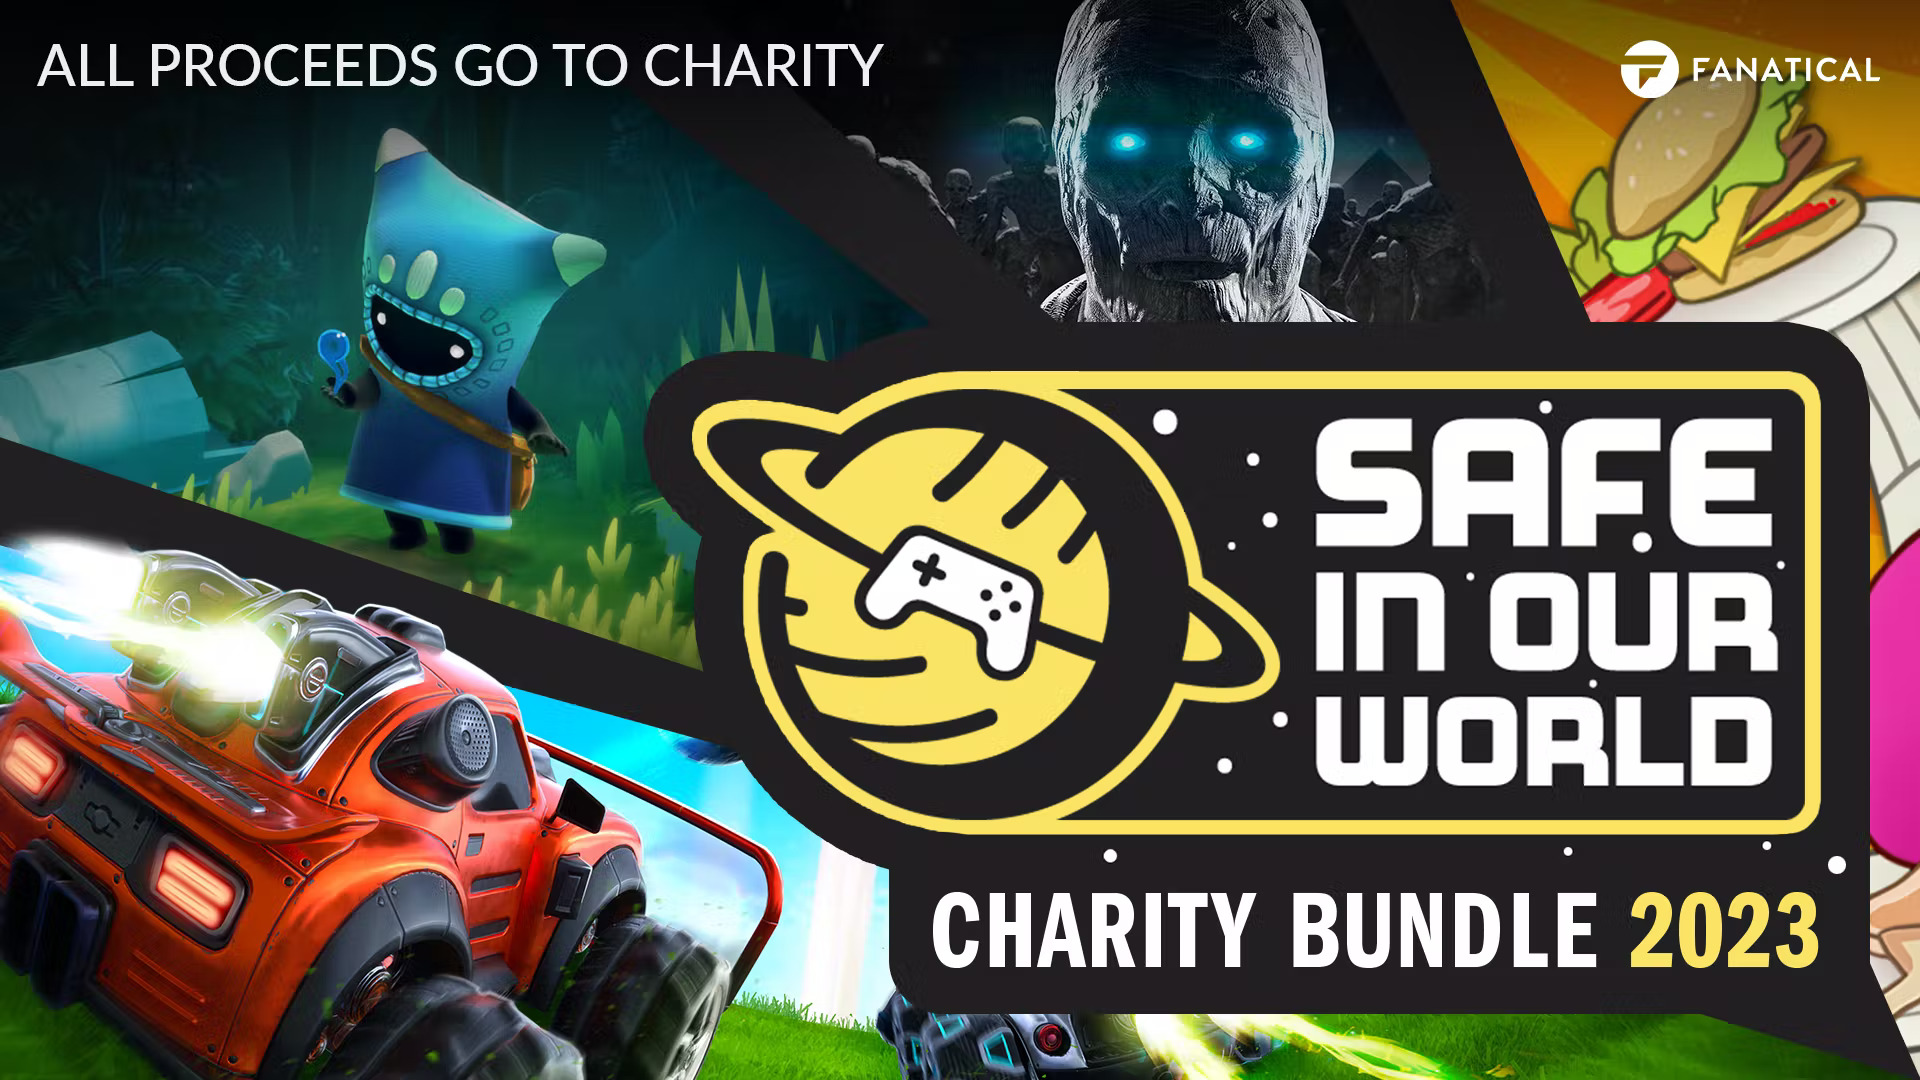 Safe in Our World Chairty Bundle 2023 - Fanatical